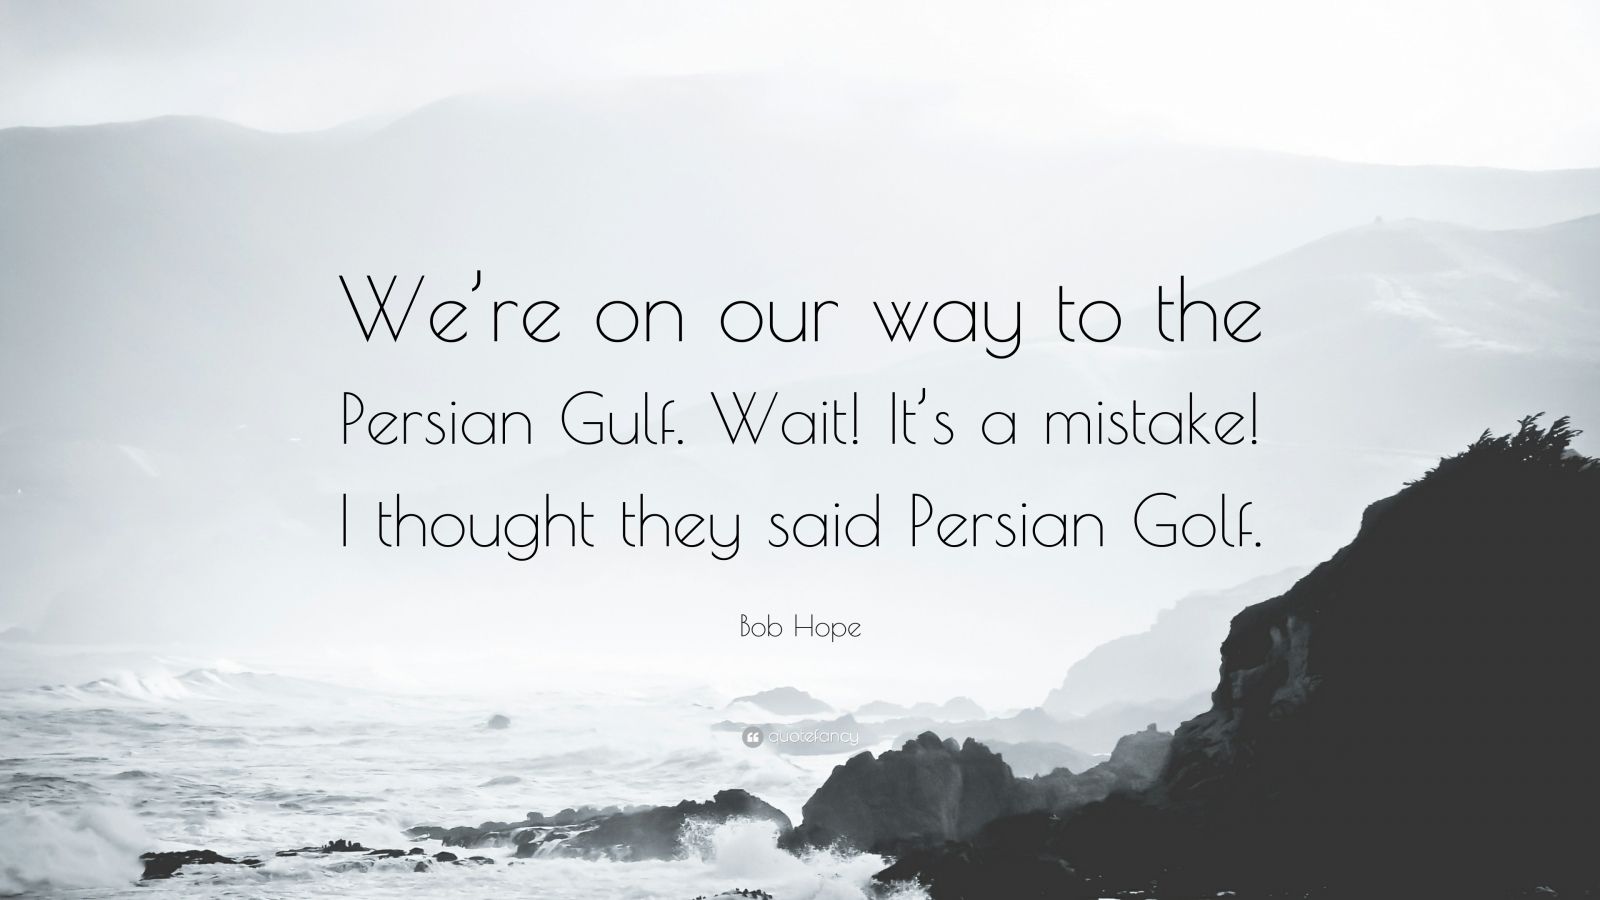 Bob Hope Quote: “We're on our way to the Persian Gulf. Wait! It's